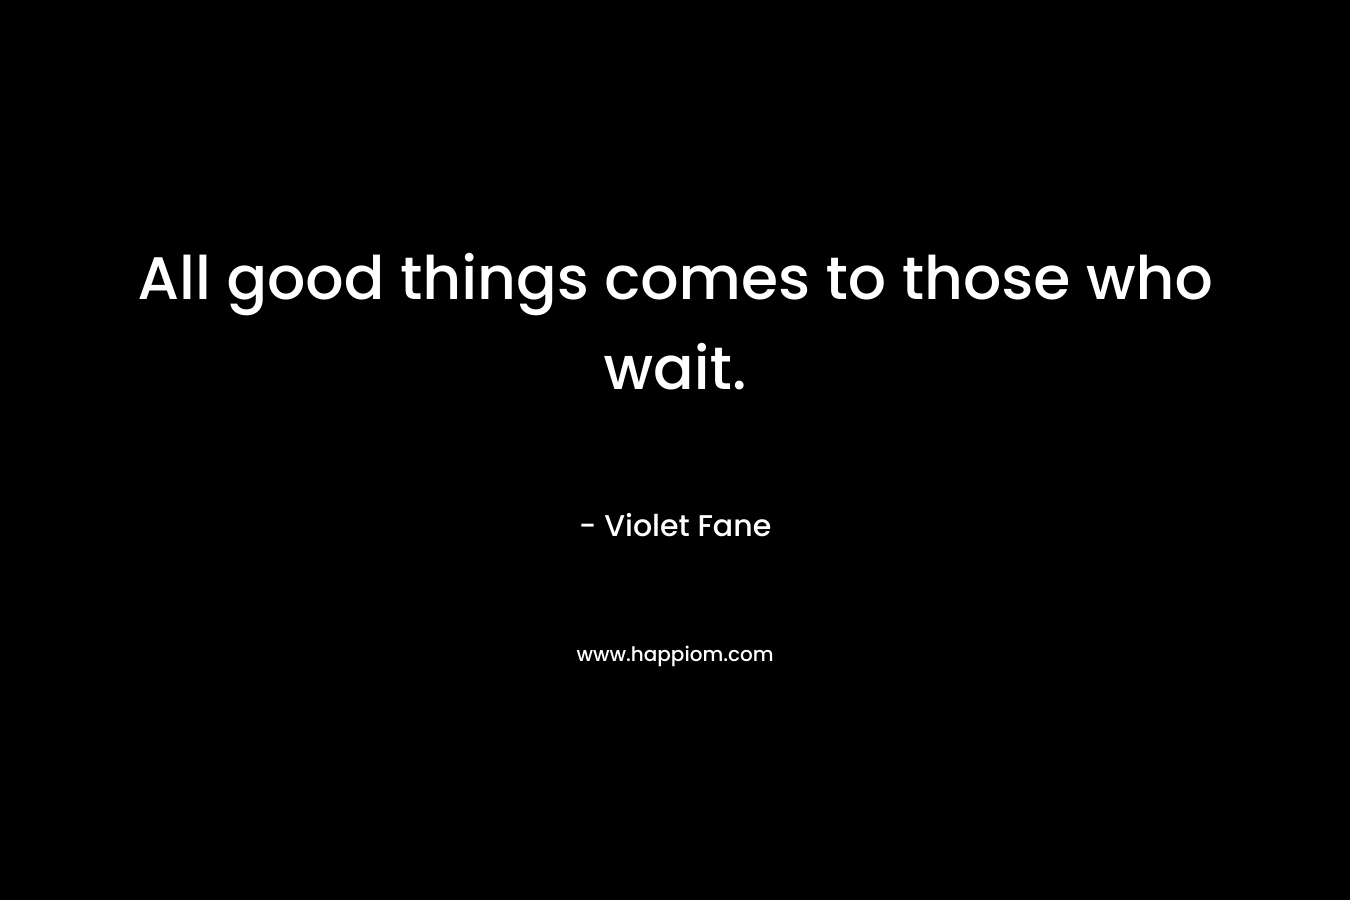 All good things comes to those who wait.